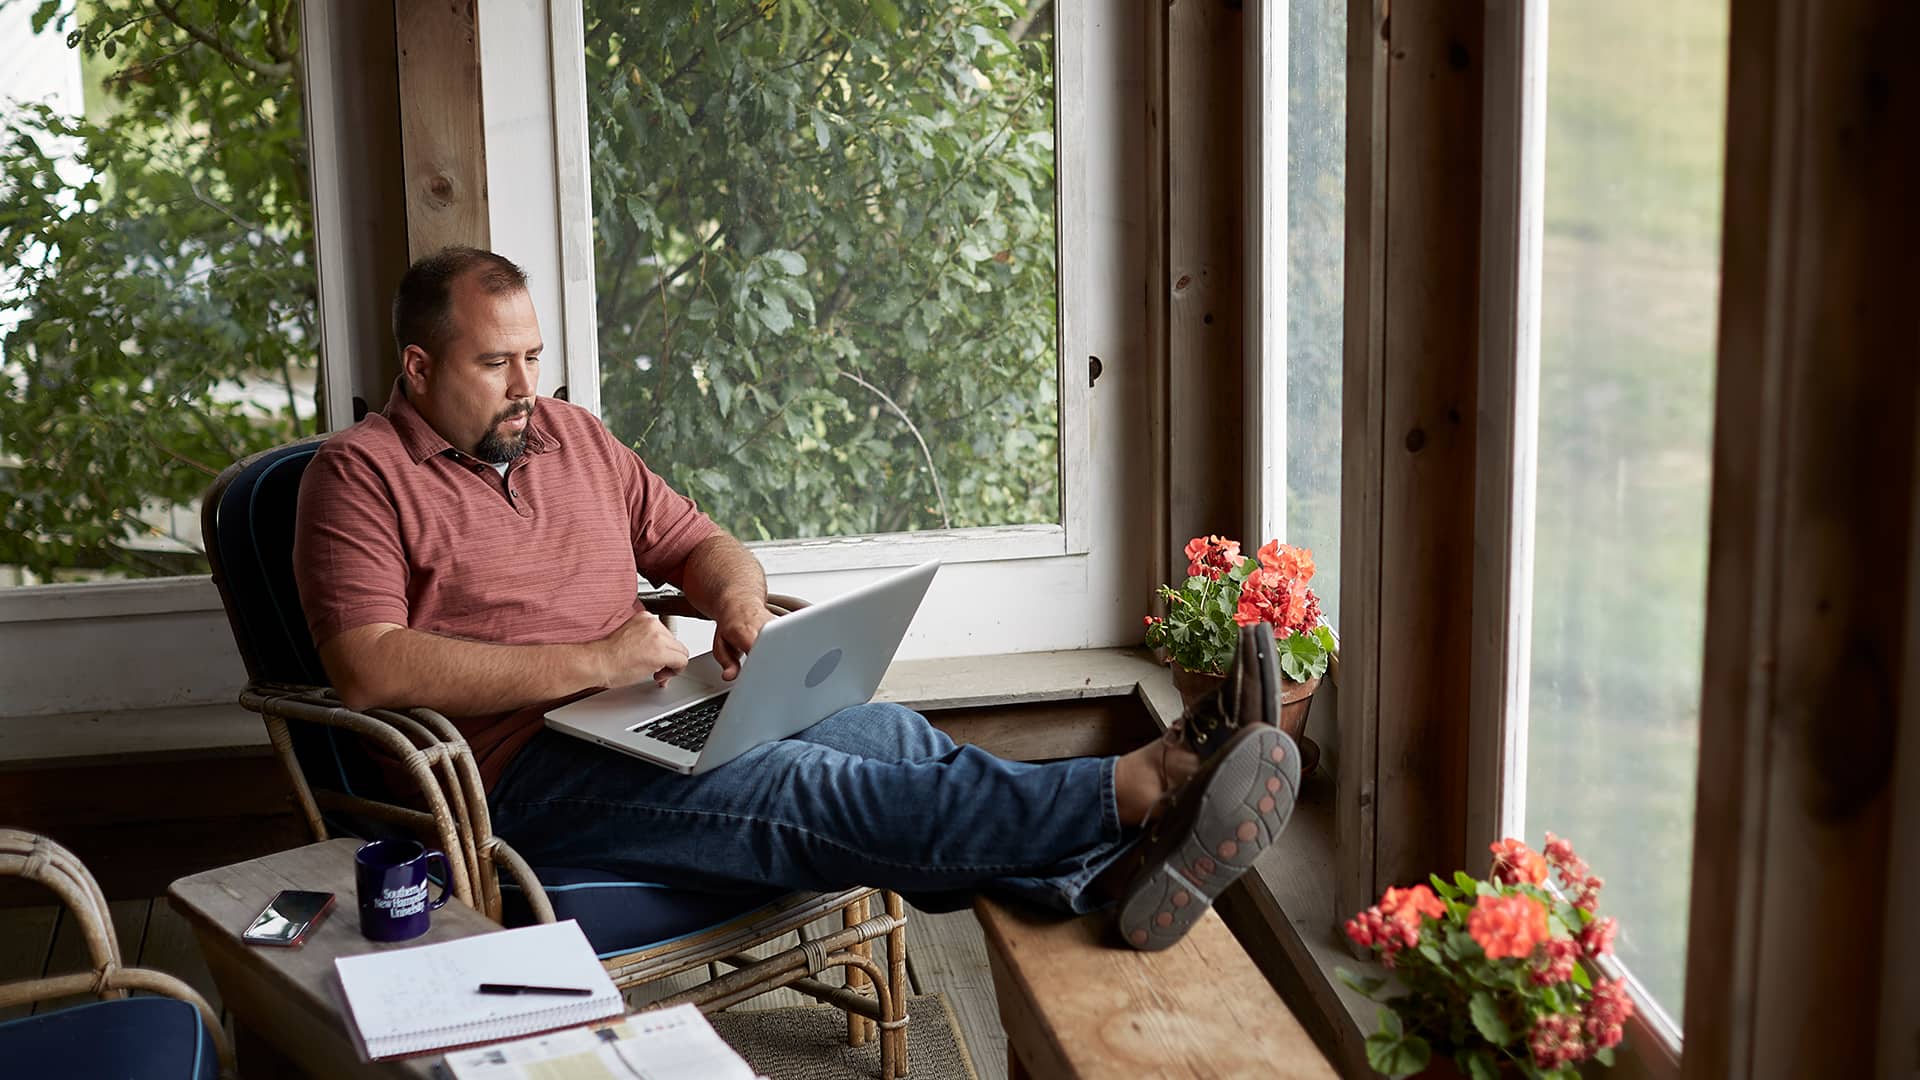 Raymond Gammon, who earned a degree in data analytics in 2020, sitting with his feet up in an indoor porch working on a laptop with an open notebook, smartphone and SNHU coffee mug next to him.